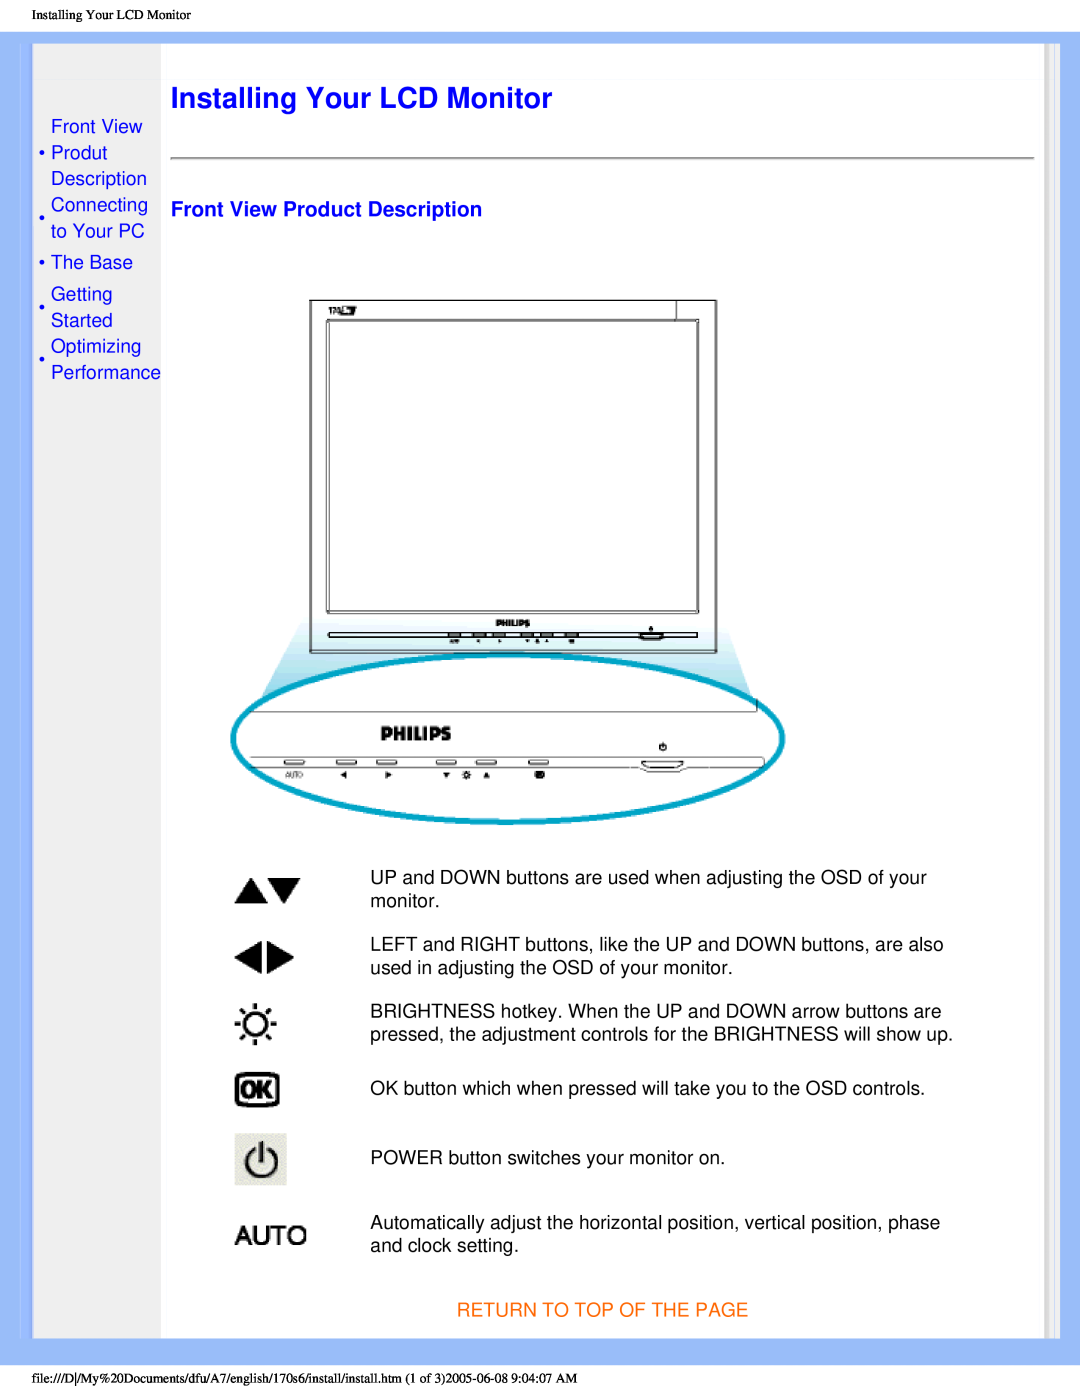 Philips 170s6 user manual Installing Your LCD Monitor, Front View Product Description, Return To Top Of The Page 